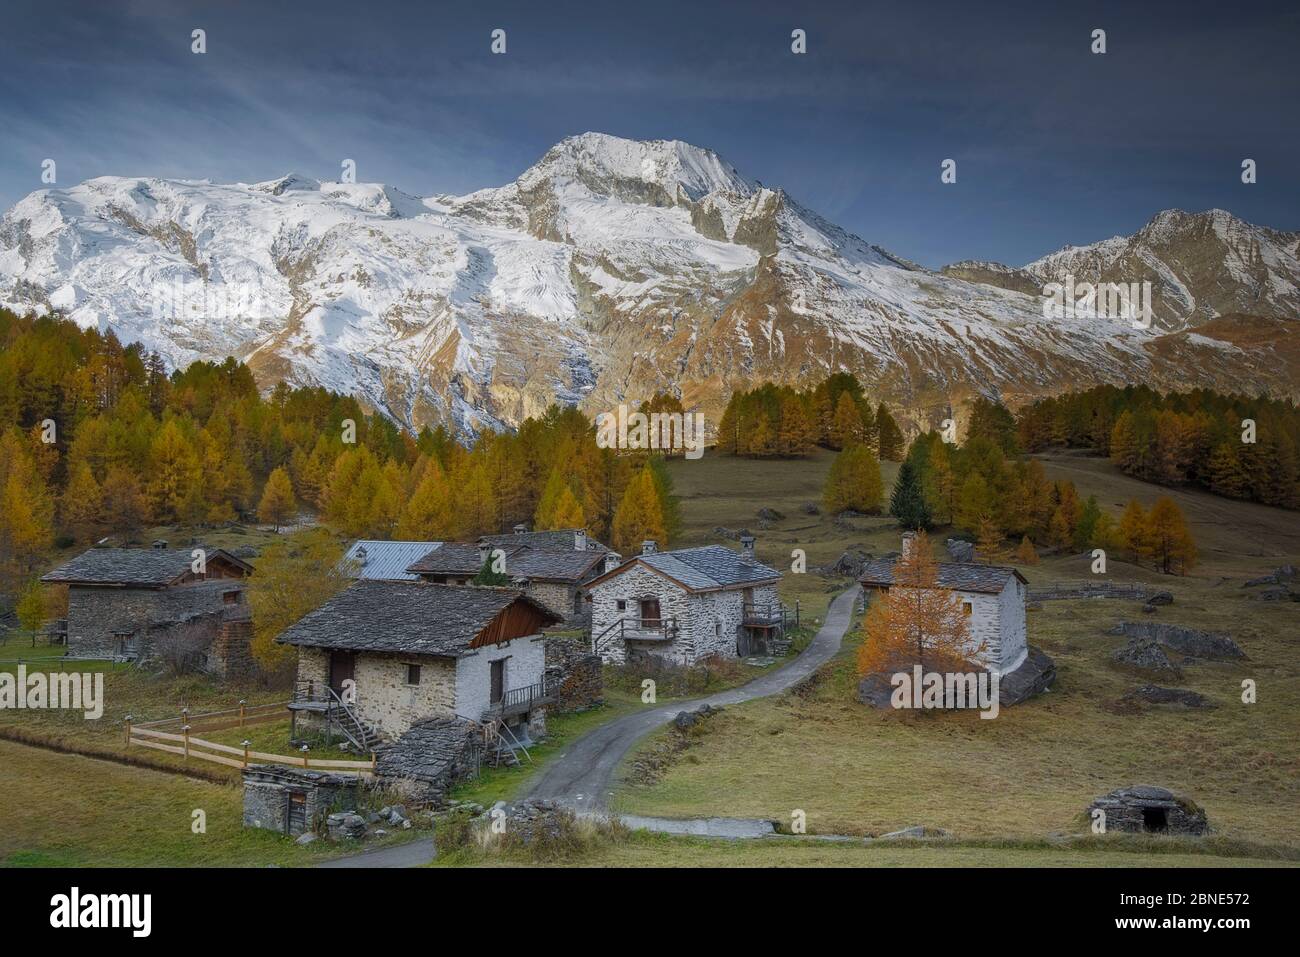 View of Le Mont Pourri, with farm buildings and European larch (Larix decidua) trees in the foreground, Le Monal Vanoise National Park, Savoie, France Stock Photo